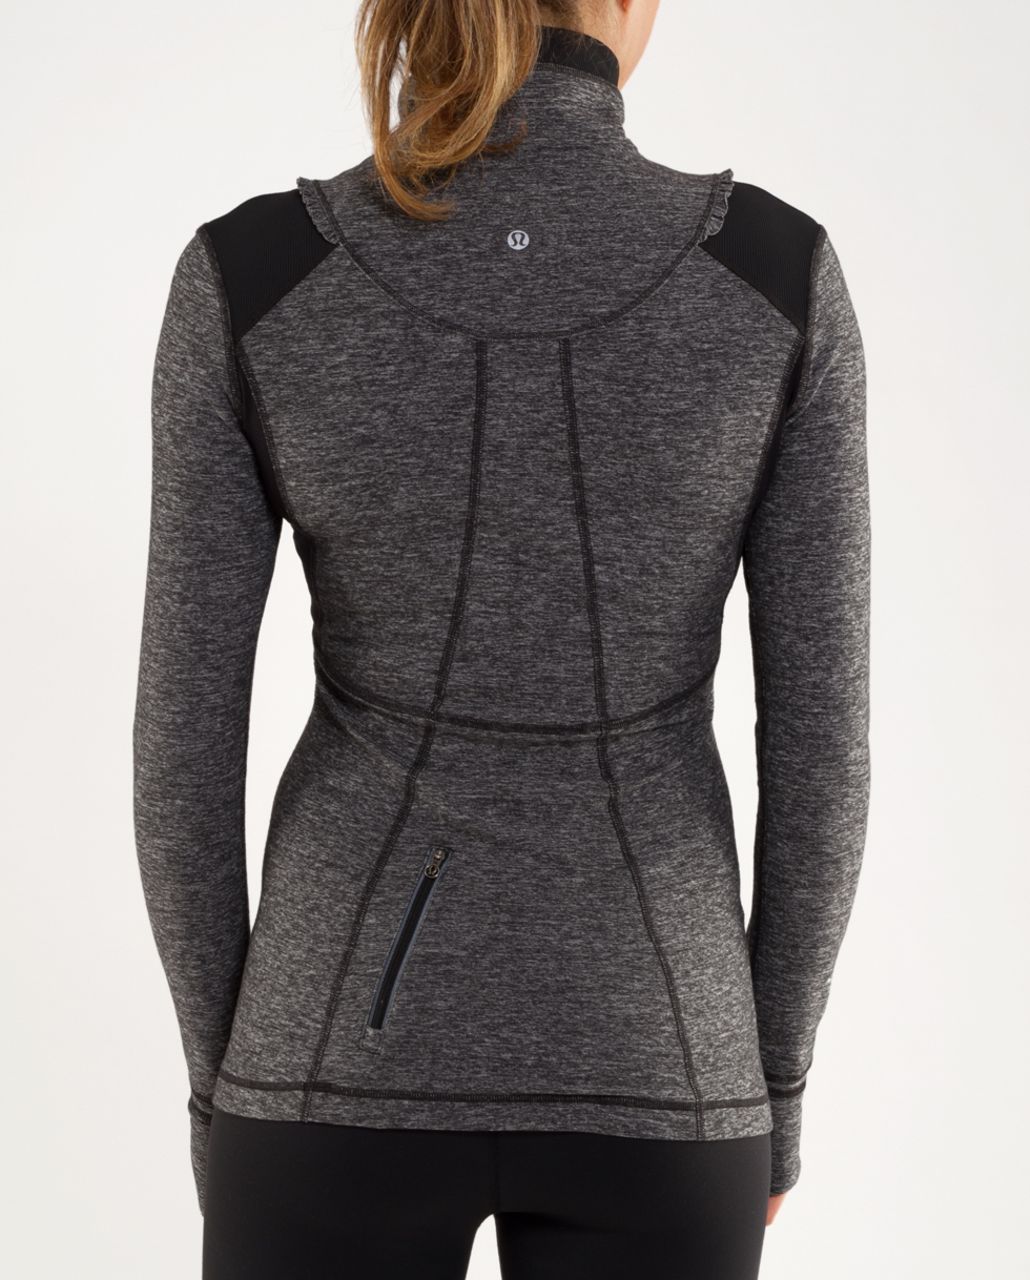 Lululemon Run:  Your Heart Out Pullover (First Release) - Heathered Black